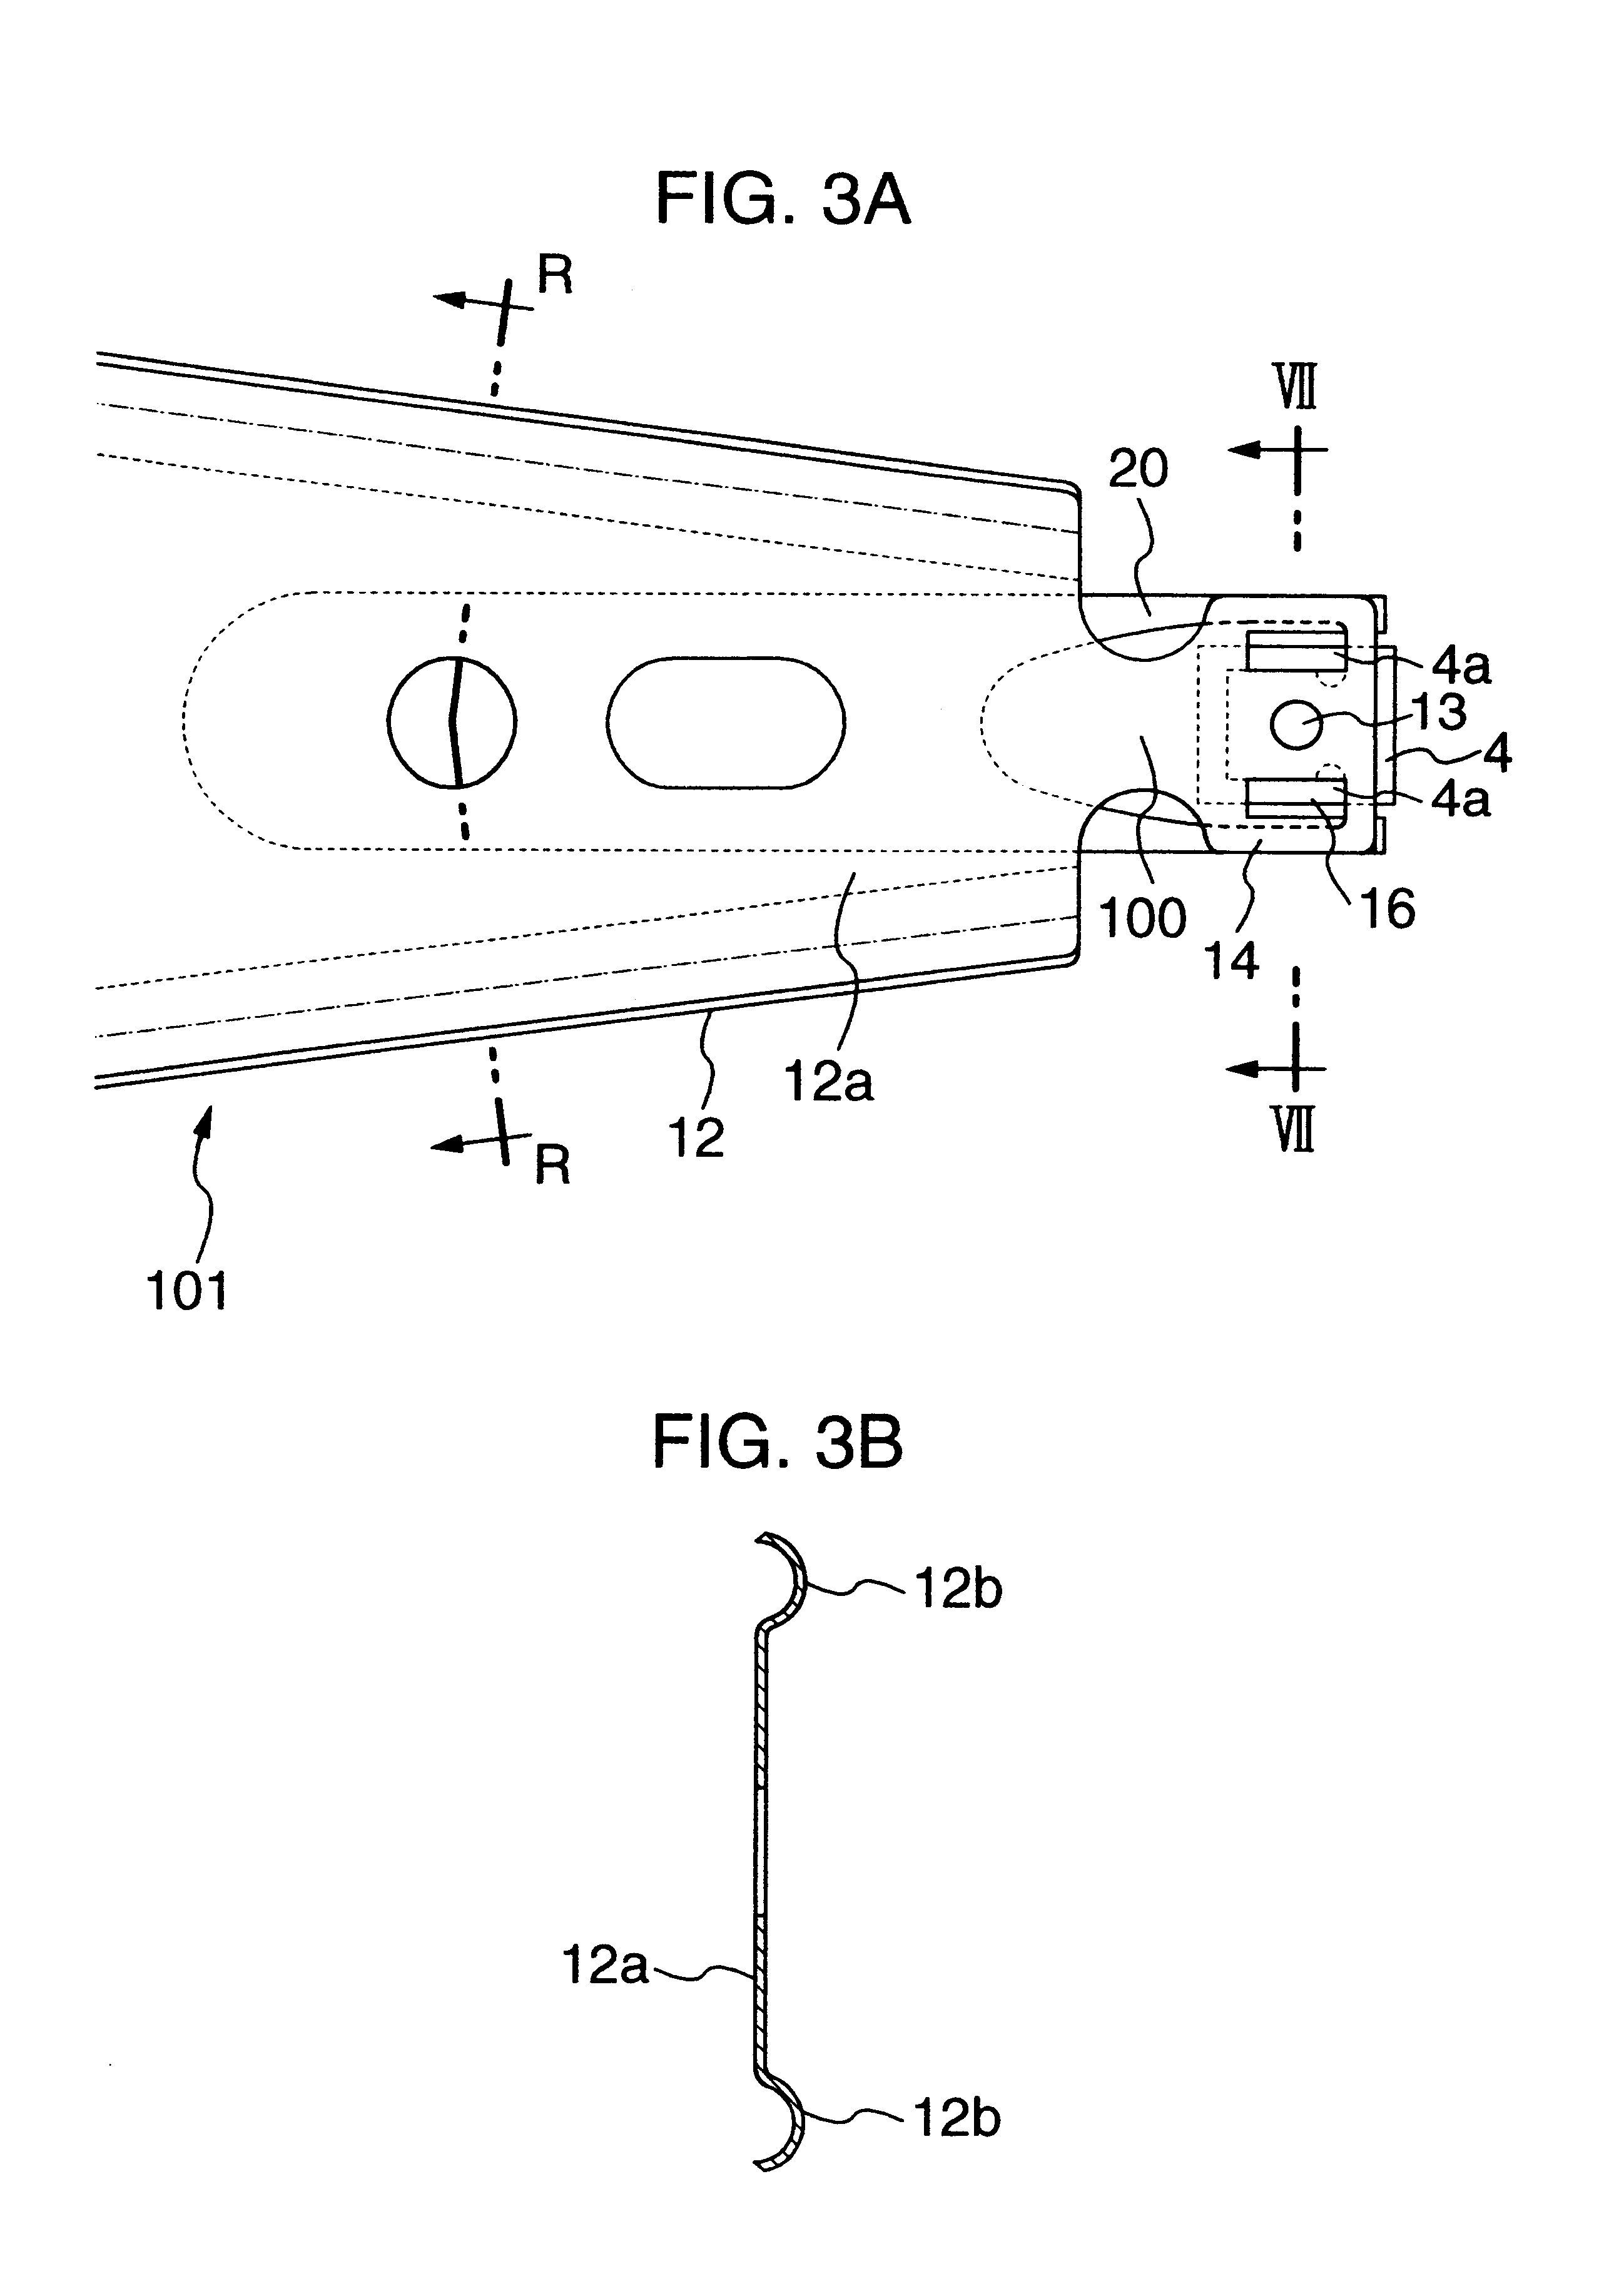 Magnetic-head supporting mechanism